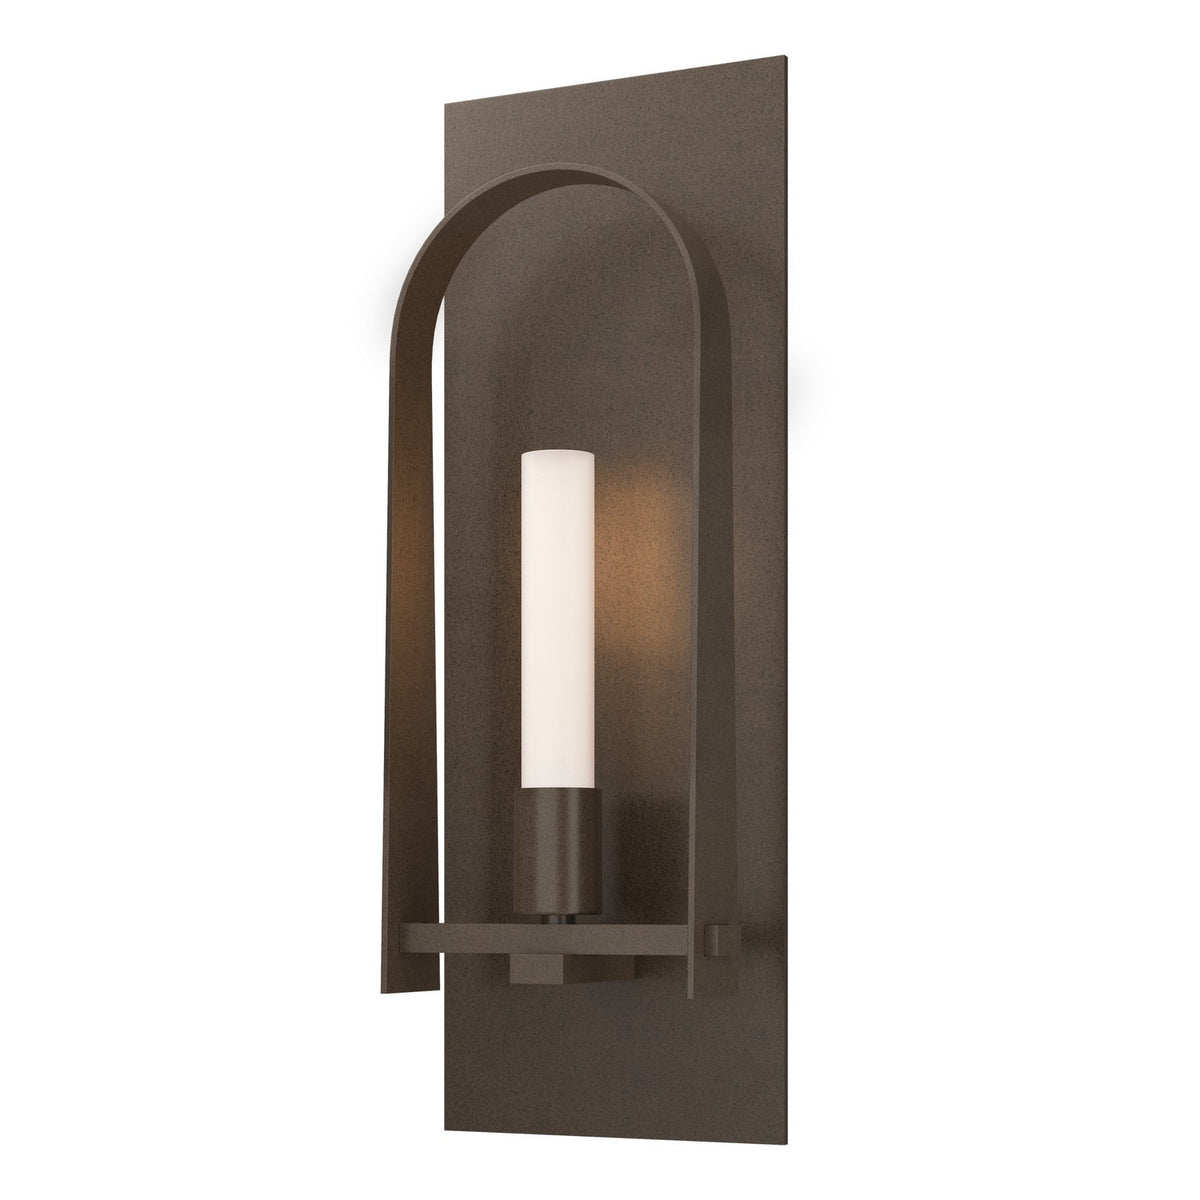 Hubbardton Forge - 201070-SKT-05-05-FD0462 - One Light Wall Sconce - Triomphe - Bronze